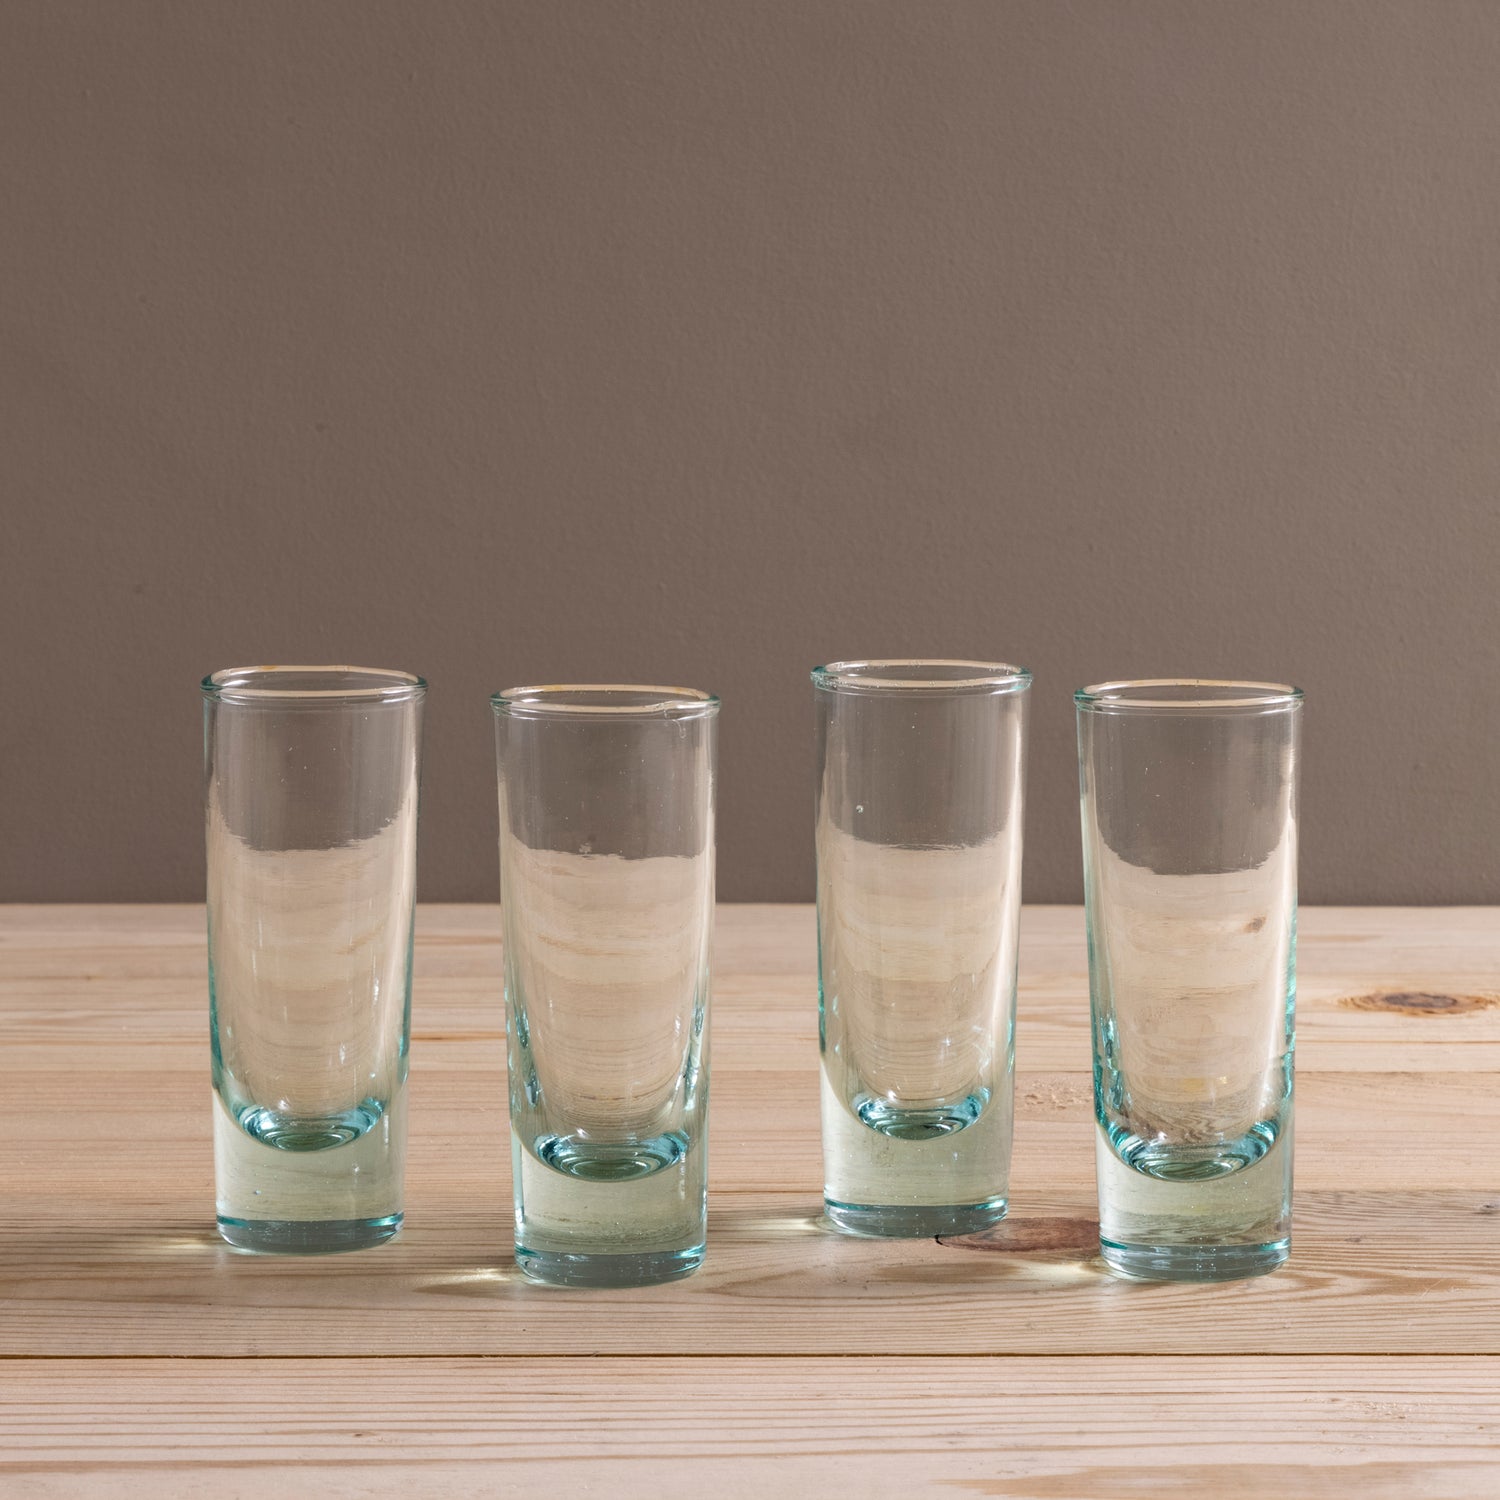 Premium Recycled Glass Shot Glass, Set of 4